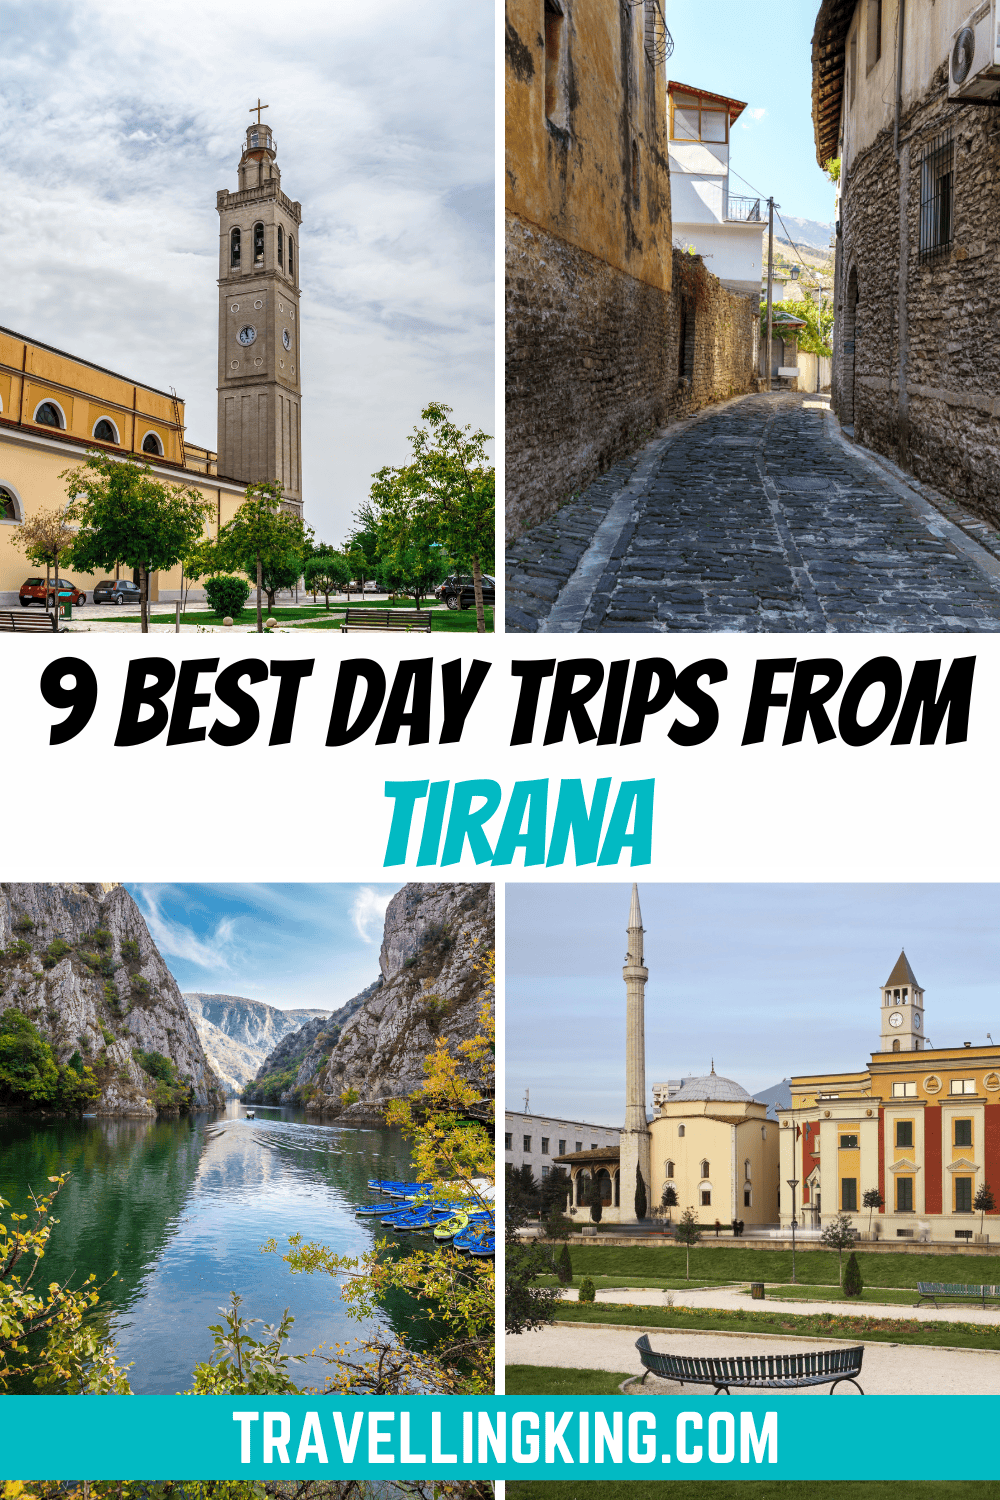 9 of the Best day trips from Tirana